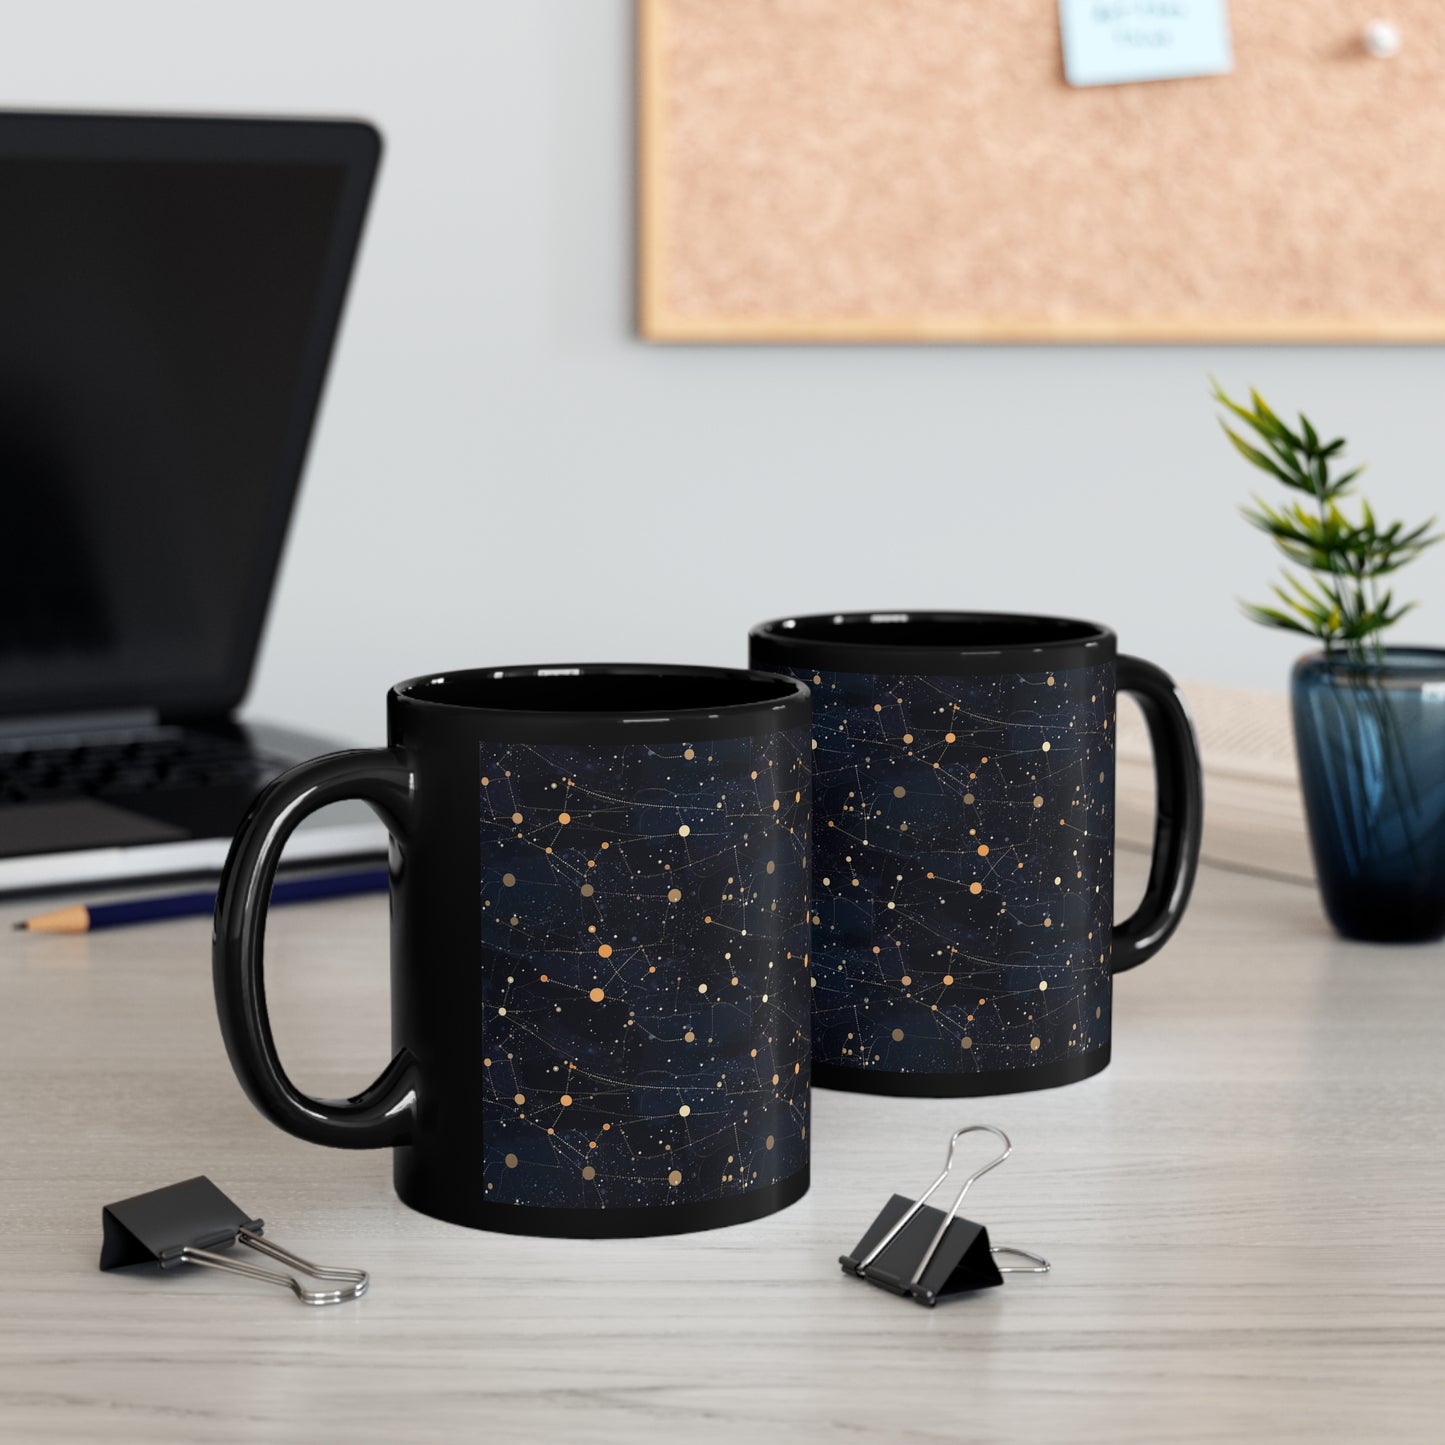 Constellation Coffee Mug, Black Universe Space Celestial Art Ceramic Cup Tea Hot Chocolate Unique Microwave Safe Novelty Cool Gift Starcove Fashion